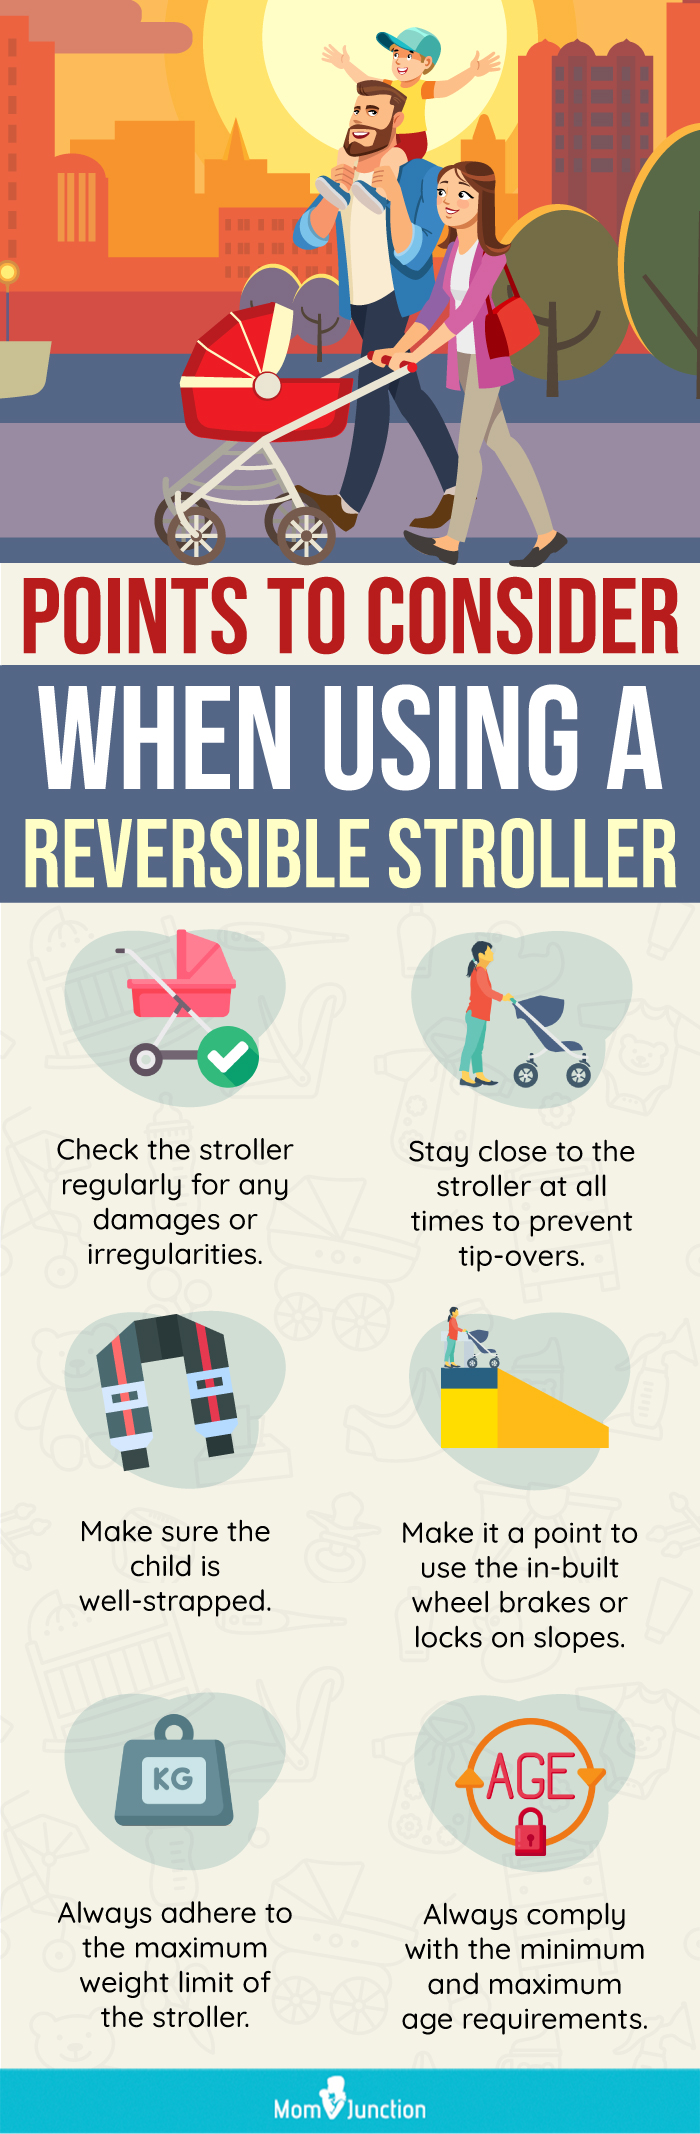 Points To Consider When Using A Reversible Stroller